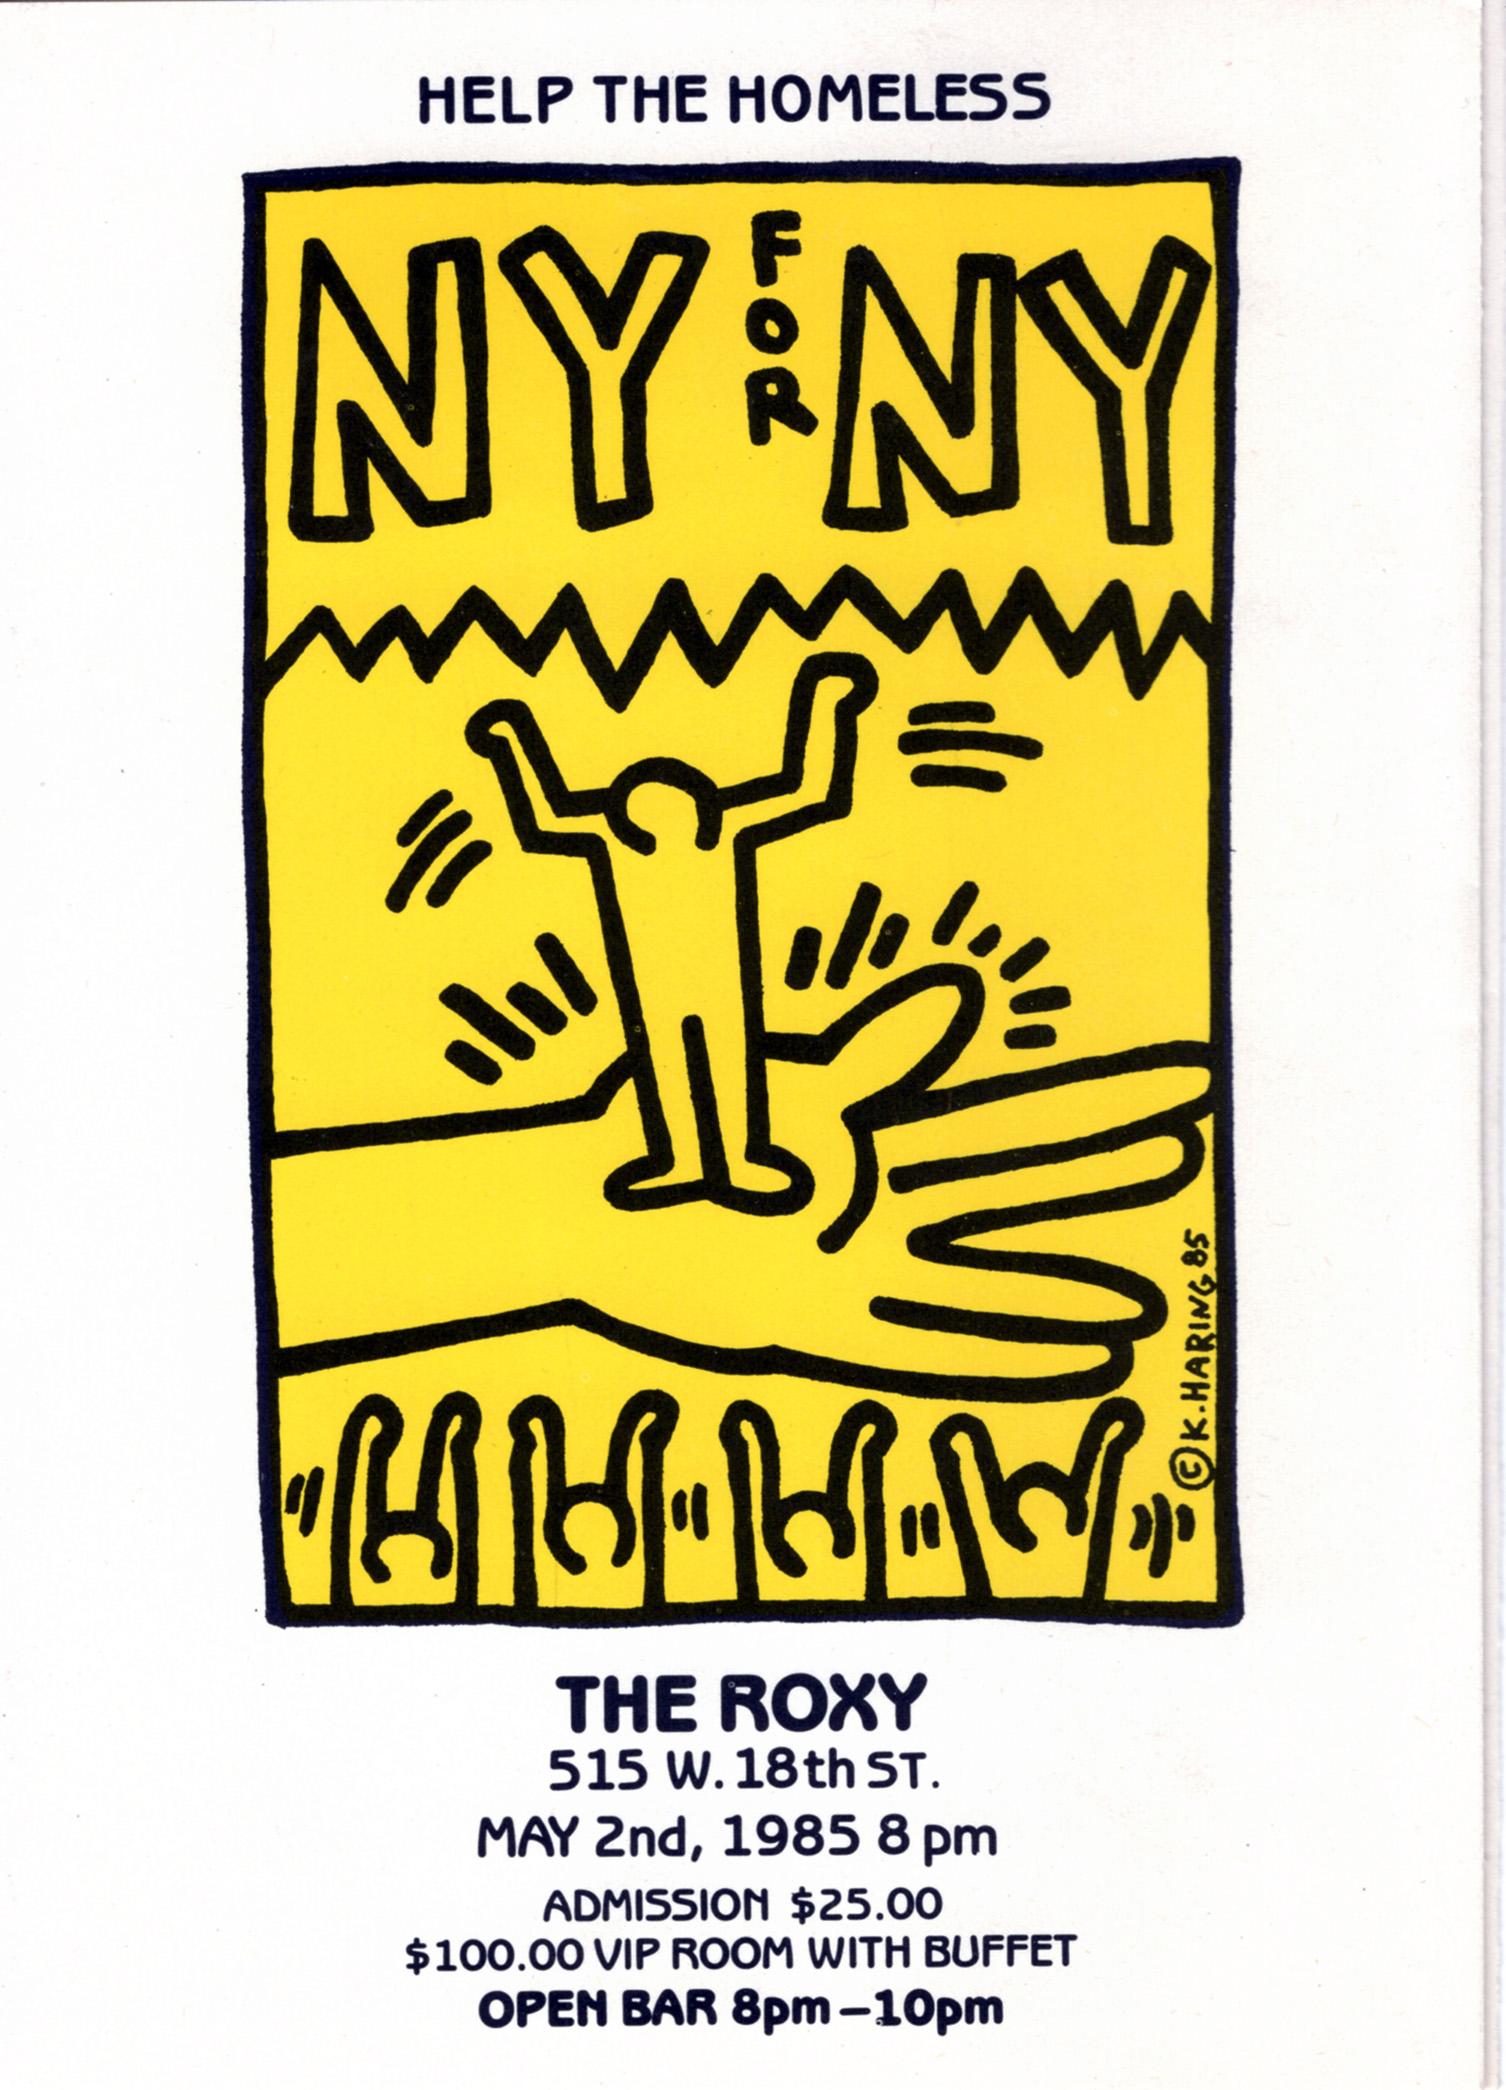 Keith Haring Help the Homeless 1985 (Keith Haring 1985 announcement) For Sale 1